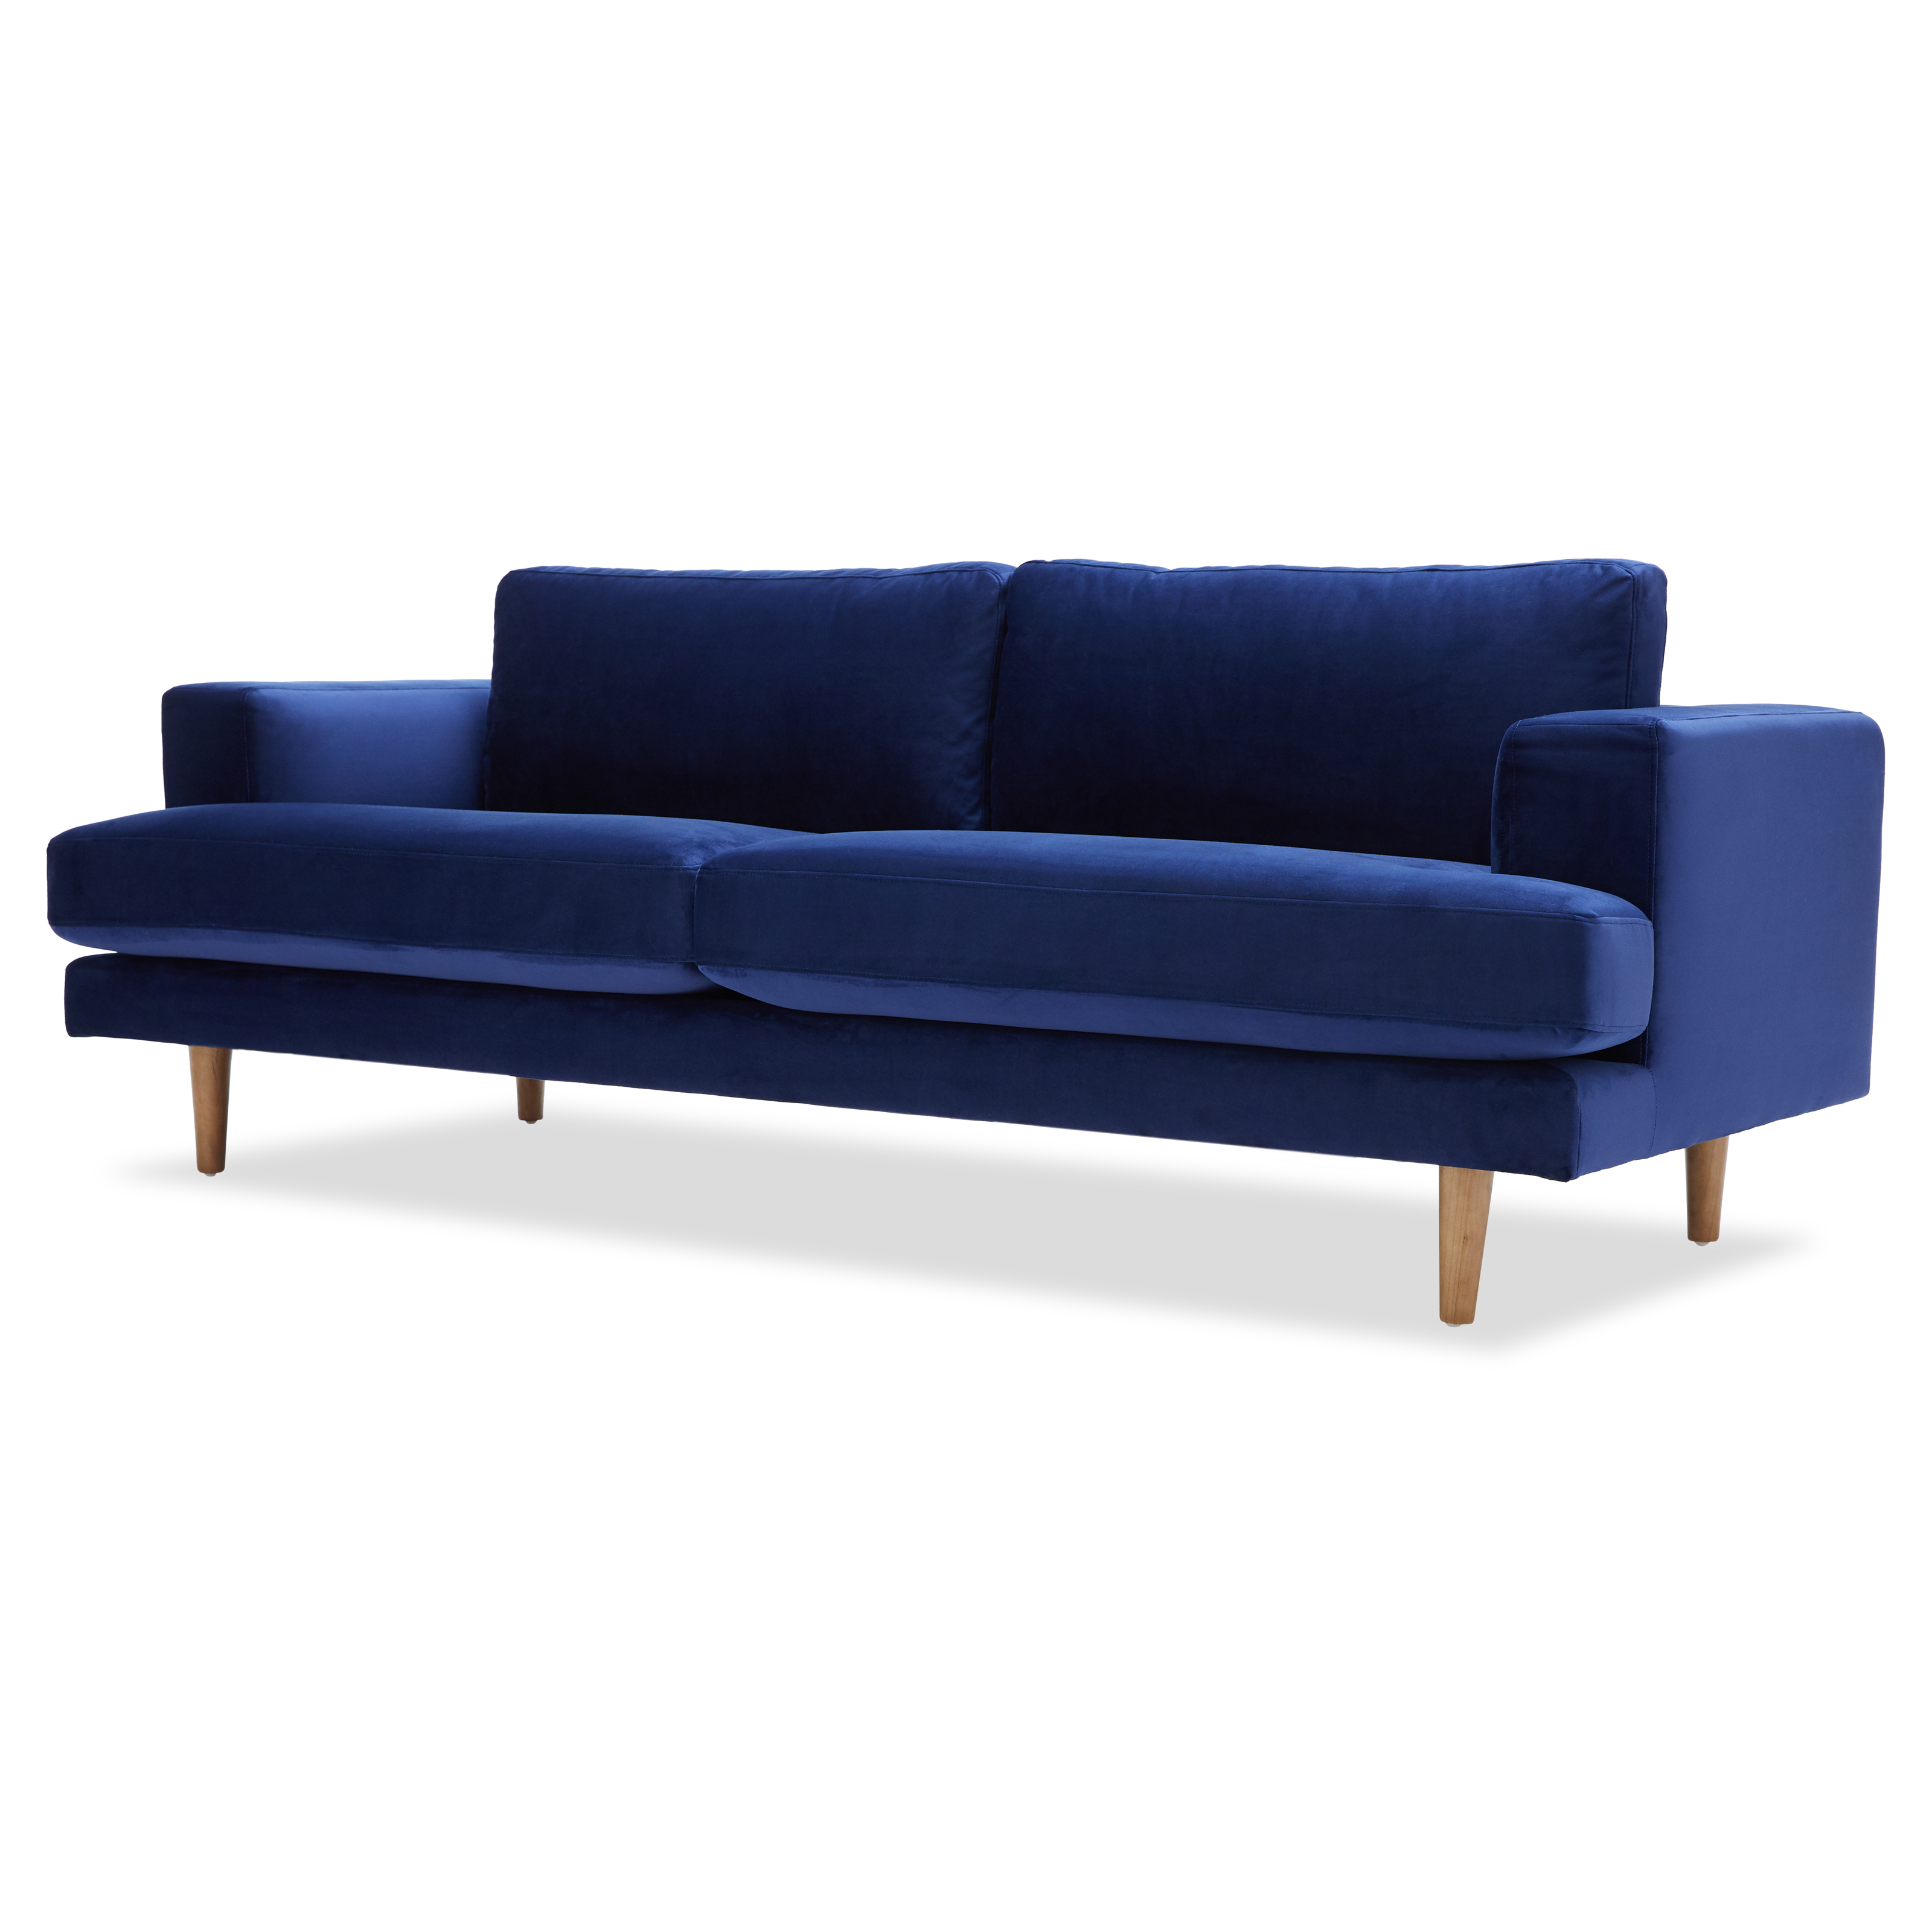 Drew Barrymore Flower Home Sofa, Multiple Colors - image 9 of 12